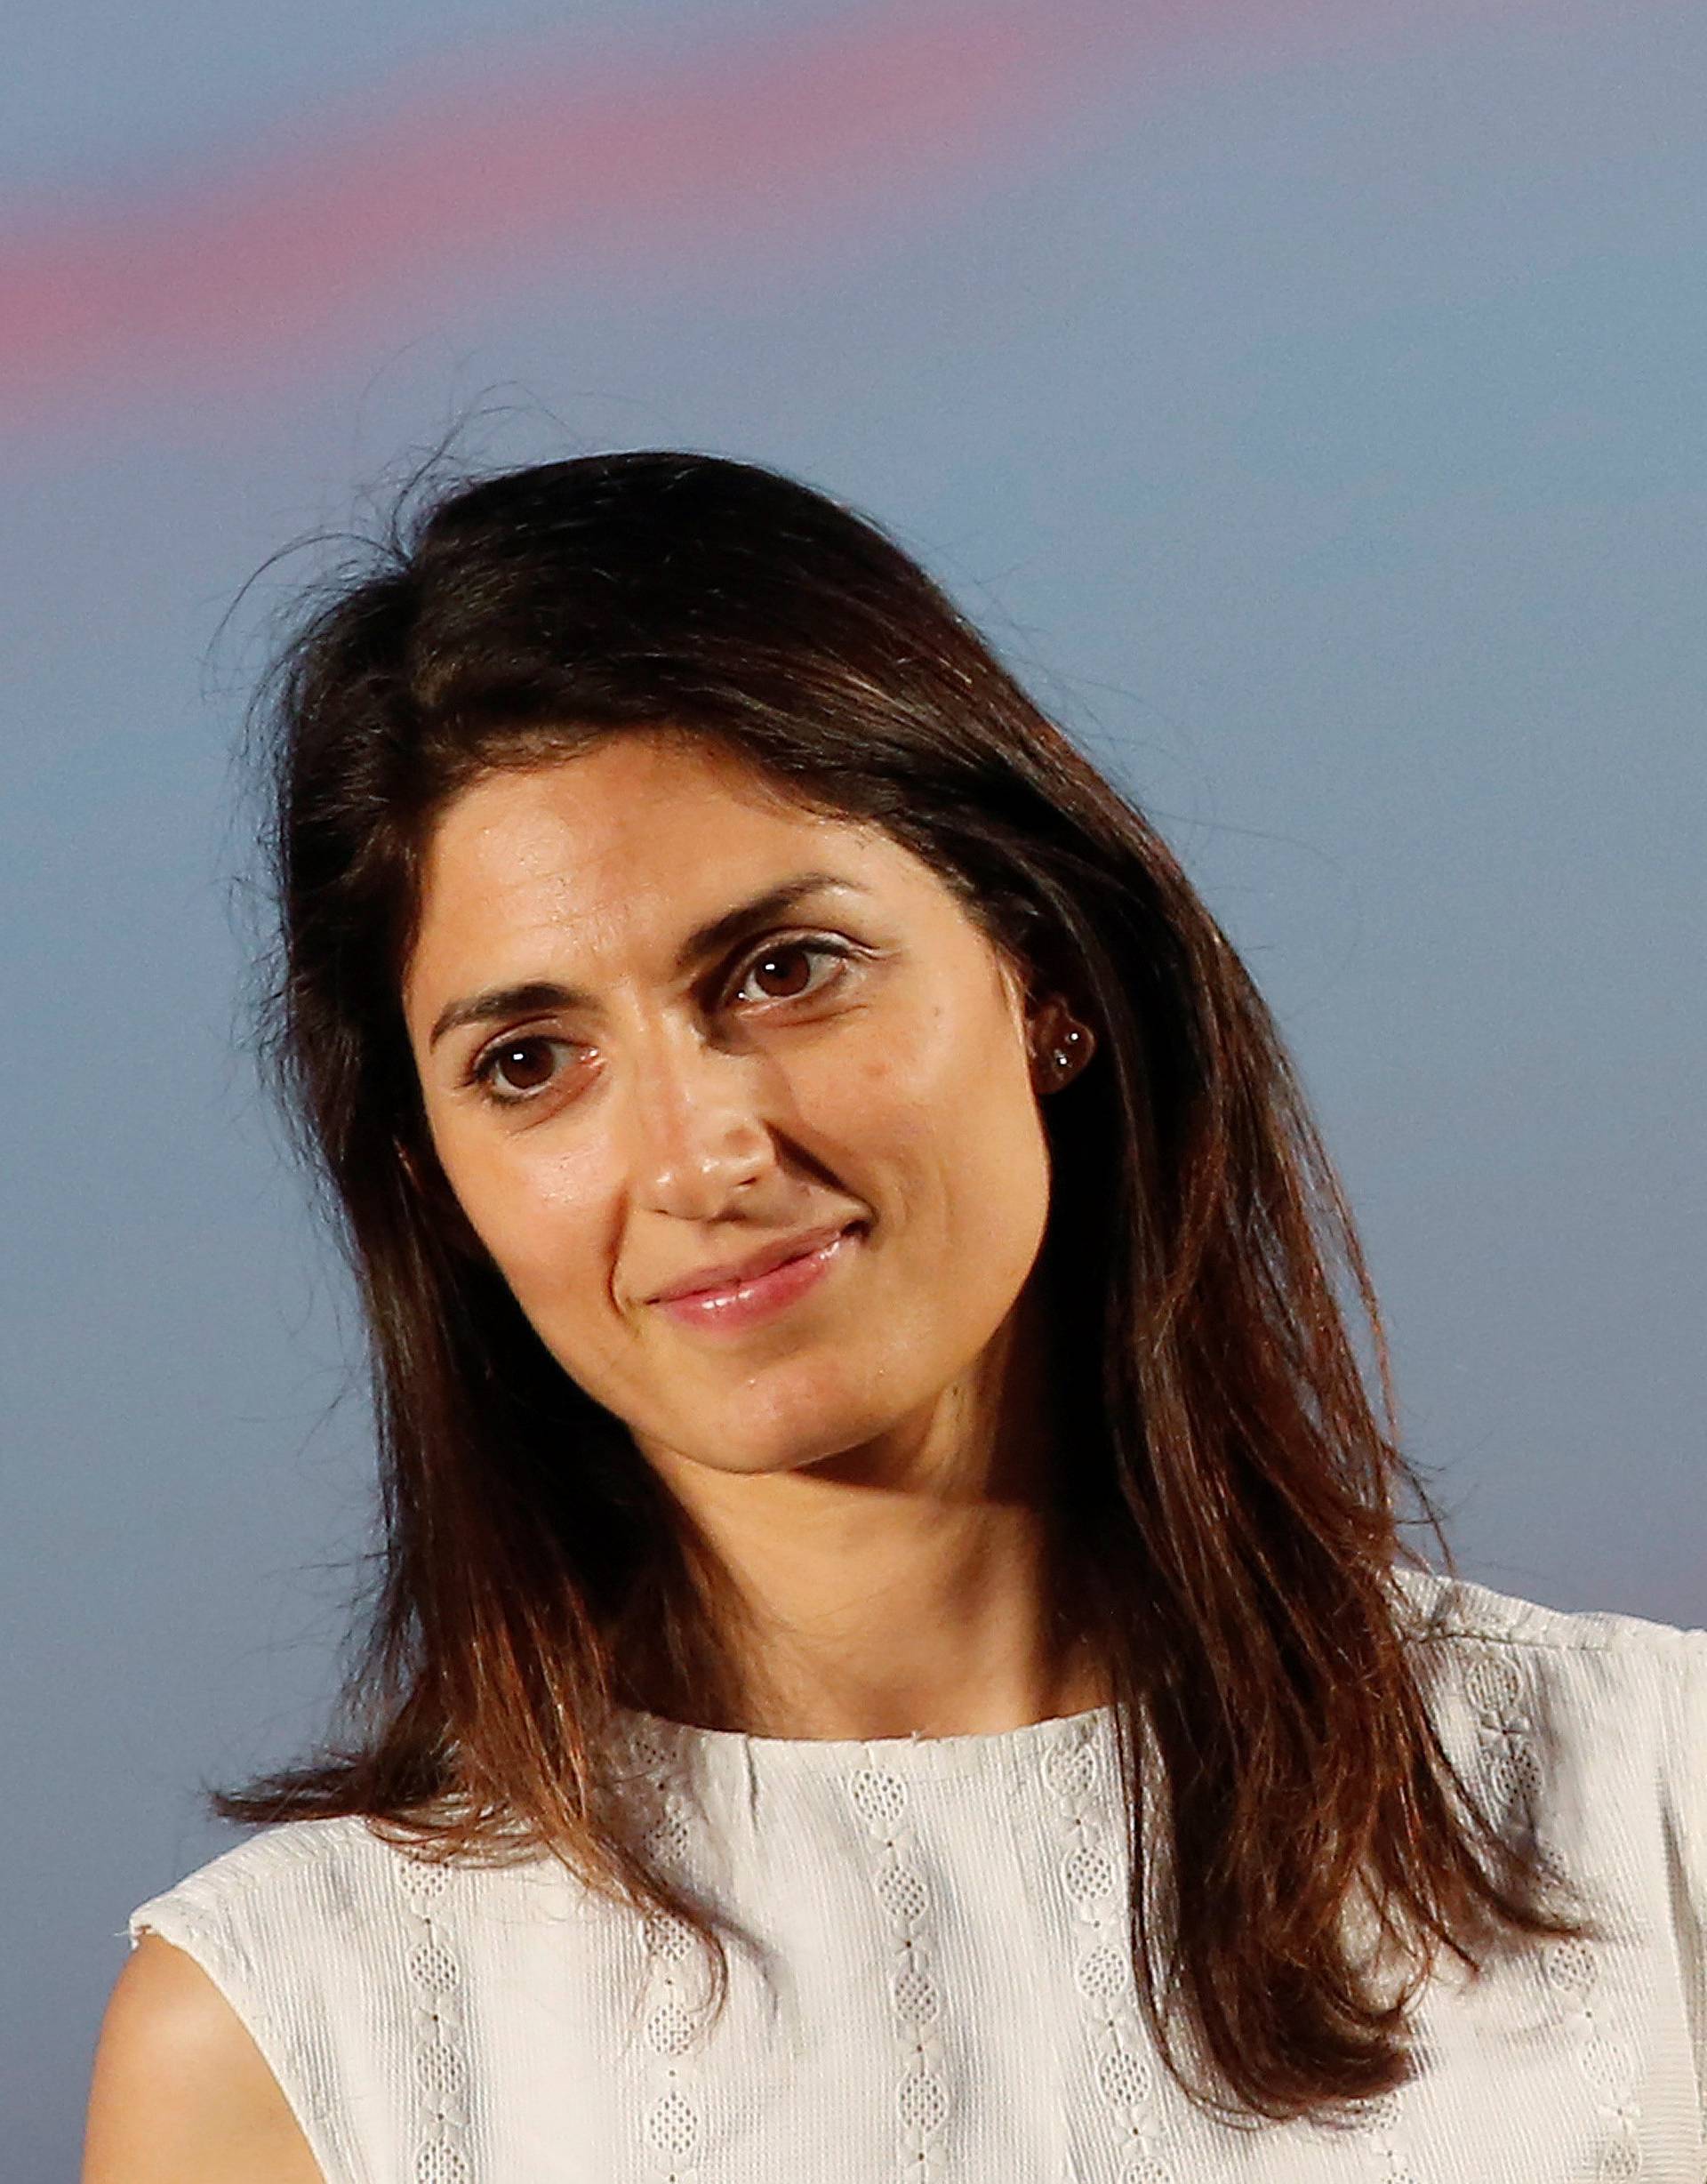 Virginia Raggi, 5-Star Movement candidate for Rome's mayor, stands on stage during a rally in Ostia, near Rome